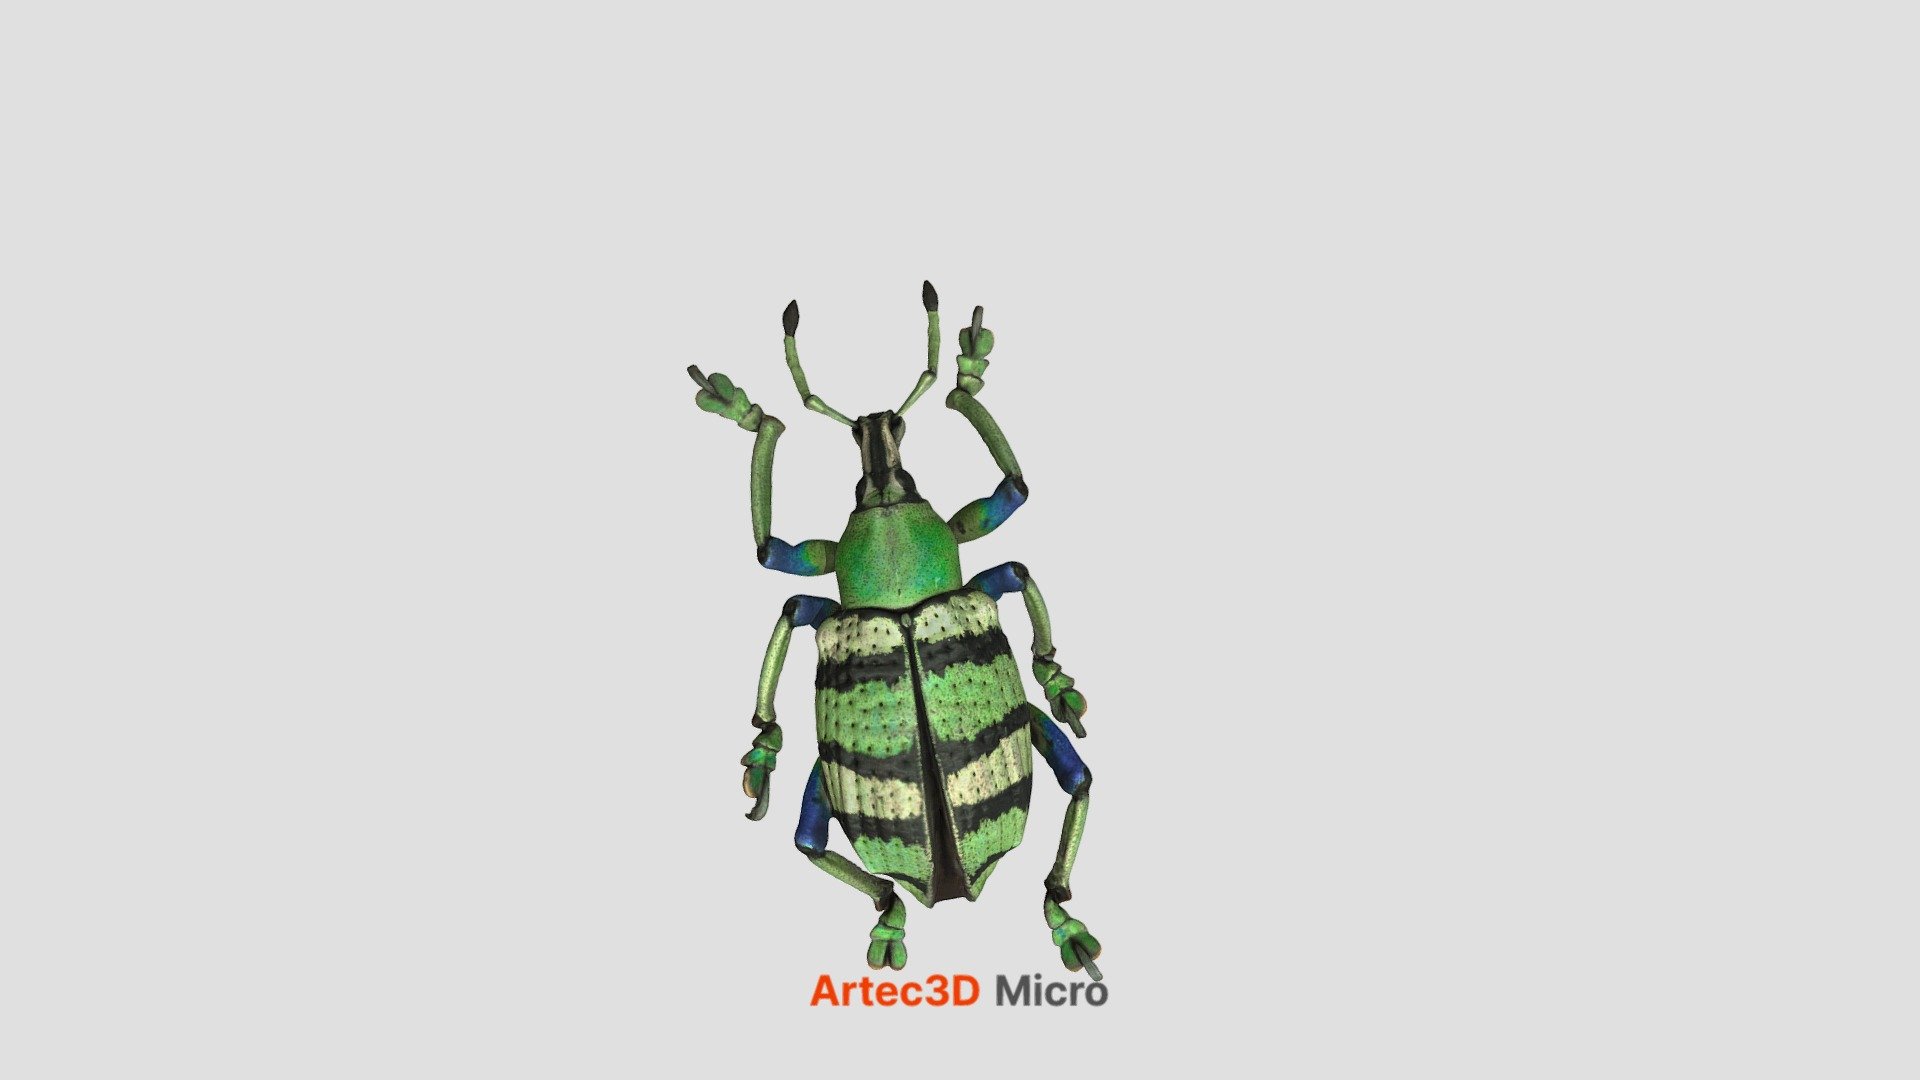 A photo-realistic 3D model of a small beetle captured with Artec Micro in such detail that you almost expect the insect to start buzzing. Our scanning specialist needed 15 minutes to capture the beetle in three different positions: the first two in HD mode for acquiring texture information, and one more, with some self-evaporating scan covering the beetle, for bringing geometry reconstruction to perfection. 
Two sets of photographs were taken right after scanning the first two times, for further registration and photogrammetry in Artec Studio. The third scan helped create the mesh, onto which the photo texture was projected, using Artec Studio’s killer texturing algorithm. Go ahead and rotate the model to enjoy the vibrant turquoise, blue, and black, as well as every intricate body part of the beetle – you might start to wonder if it’s you or the beetle moving its claws, wings, and antennae.    

Scanning time: 15 minutes | Photographing time: 30 minutes | Processing time: 30 minutes - Beetle - 3D model by Artec 3D 3d model